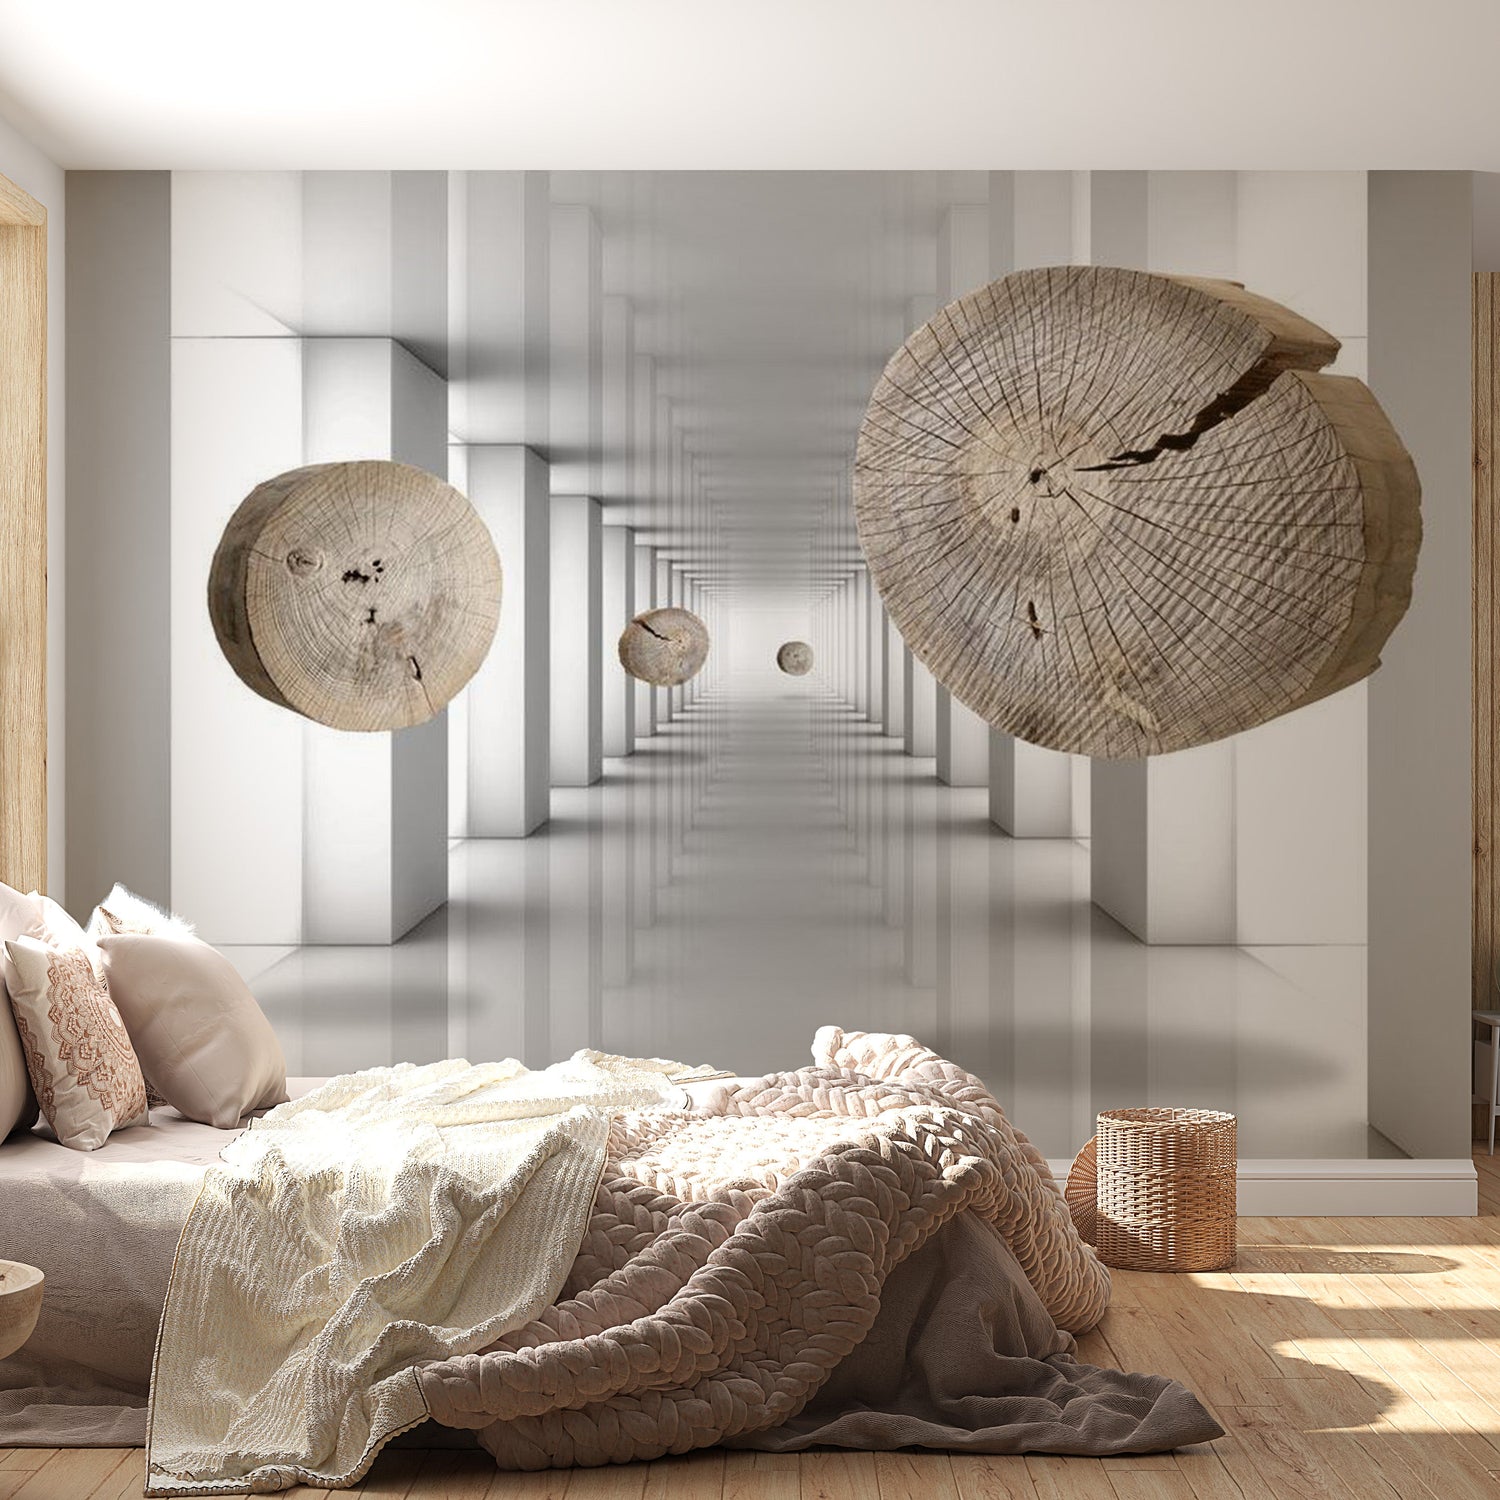 3D Illusion Wallpaper Wall Mural - Floating Wood